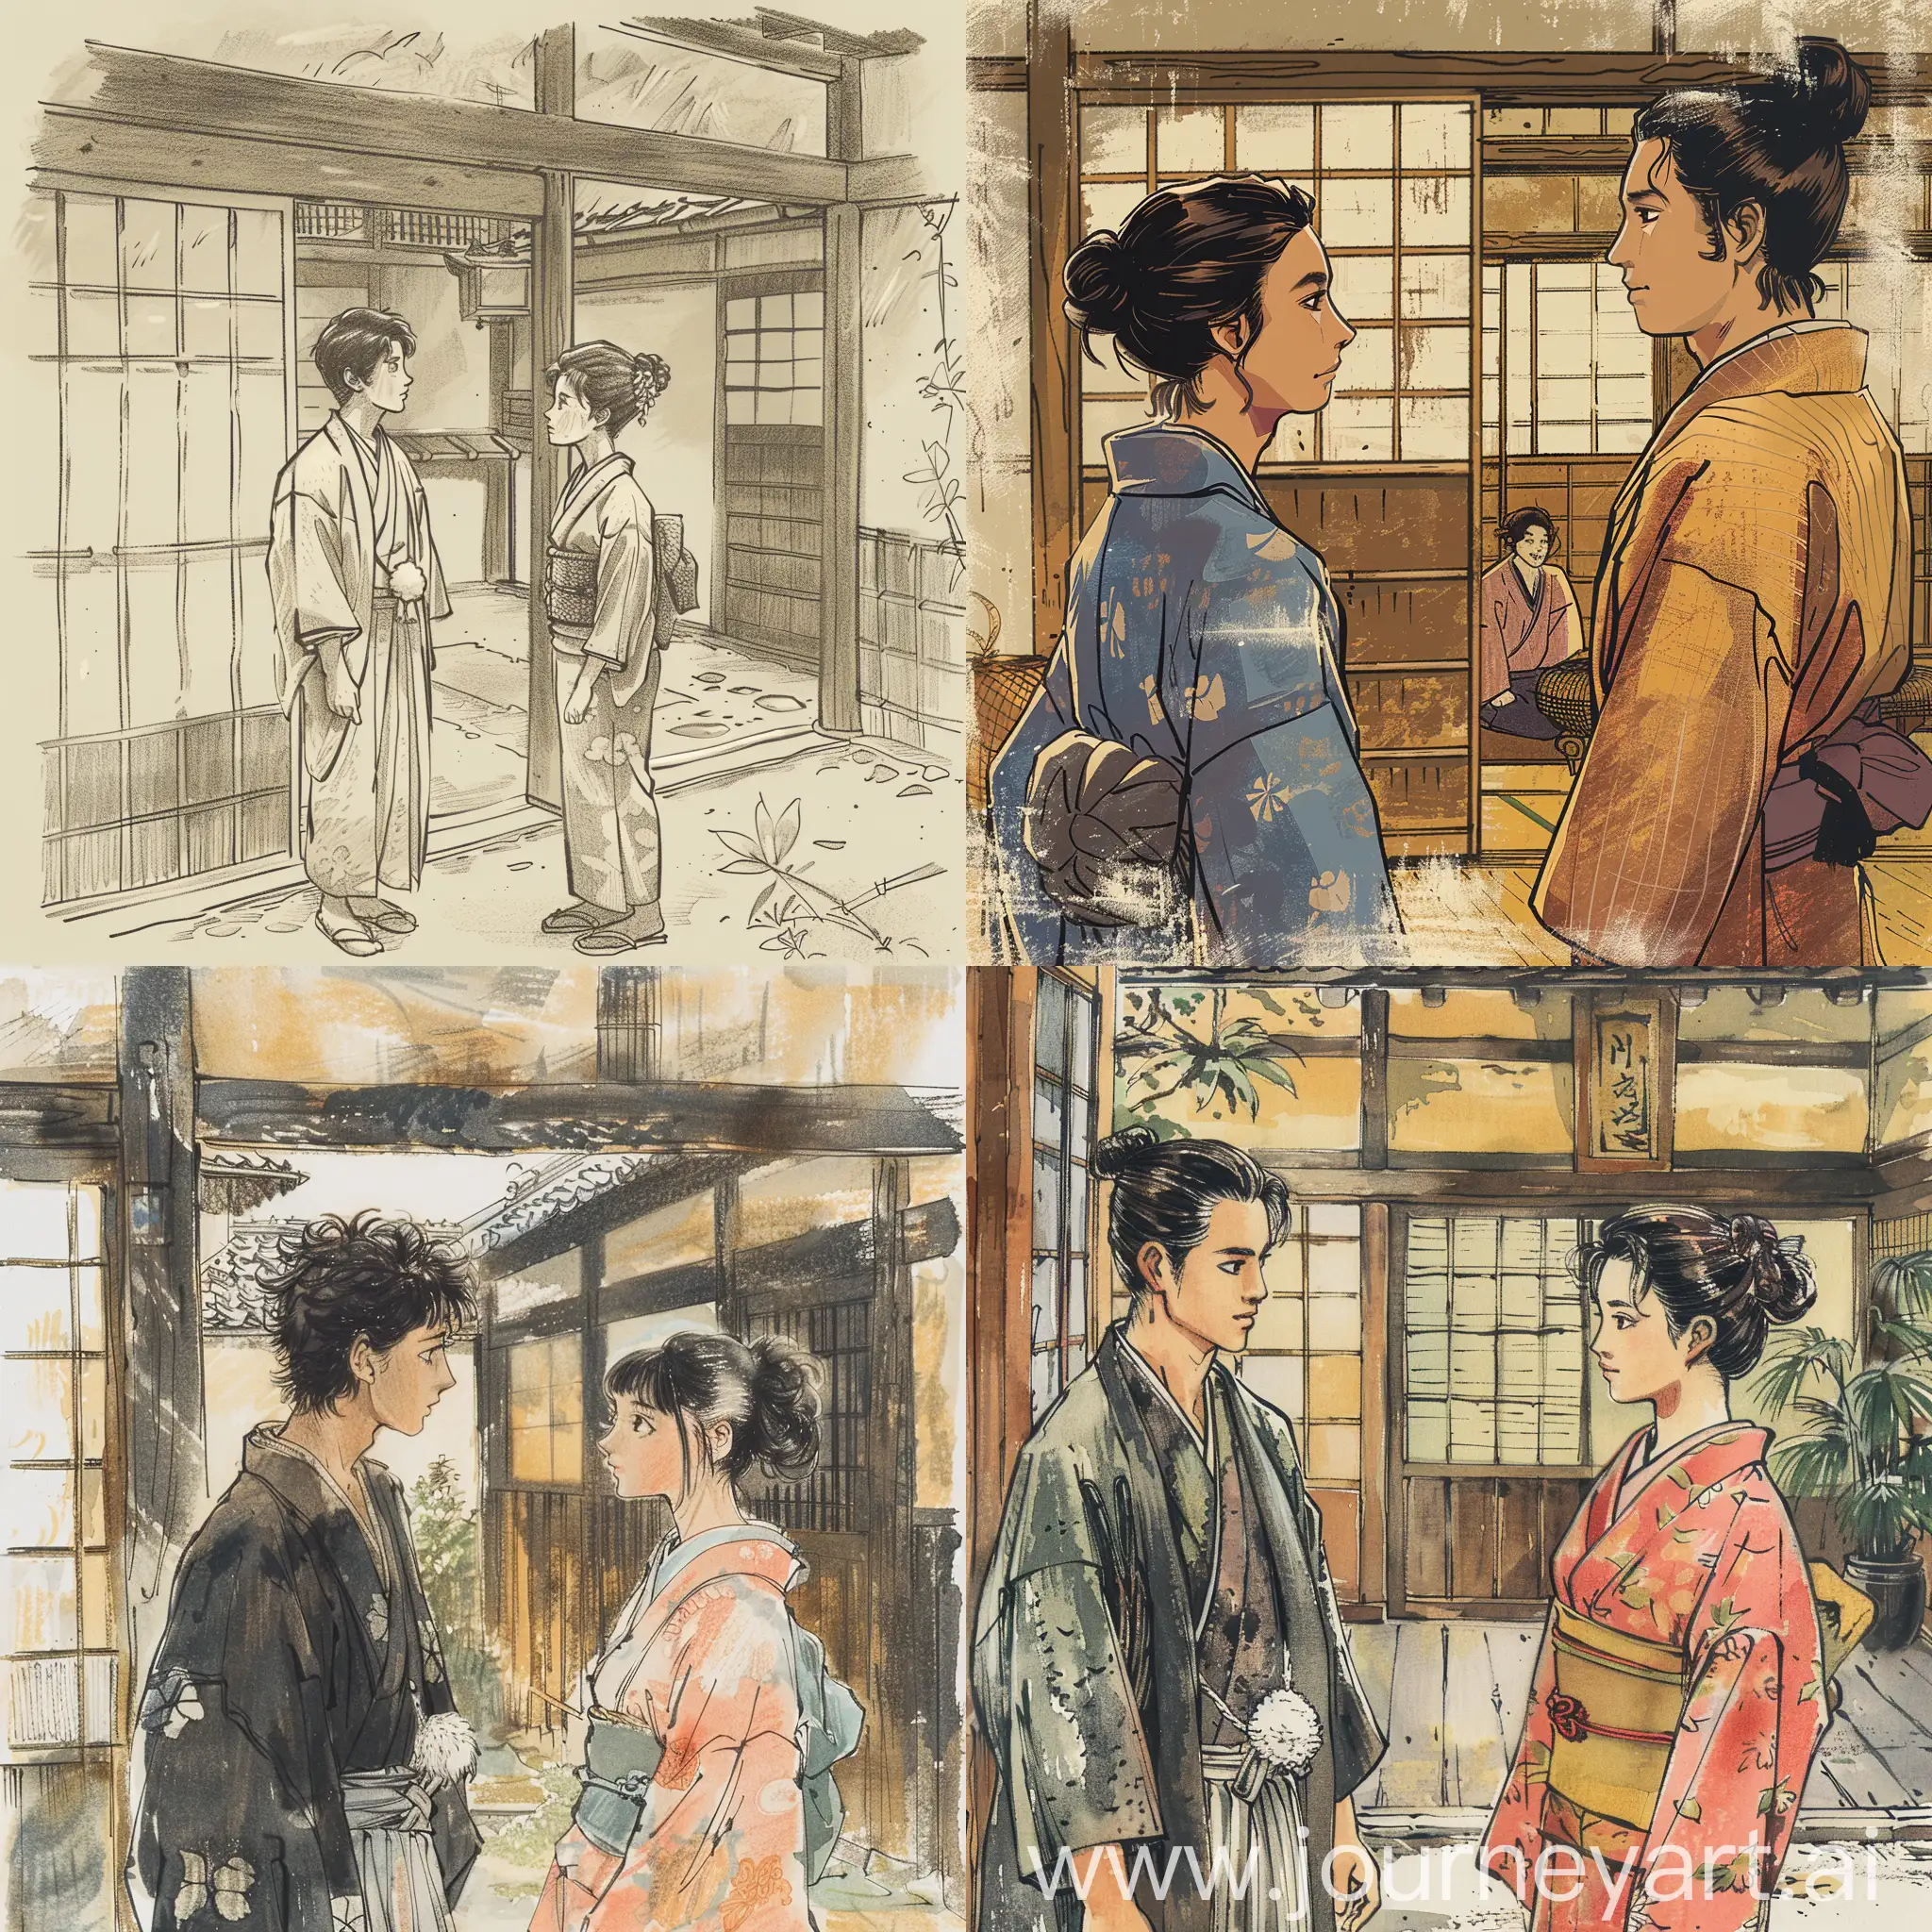 Edo-Era-Japanese-Home-Young-Man-and-Servant-Woman-in-Storybook-Illustration